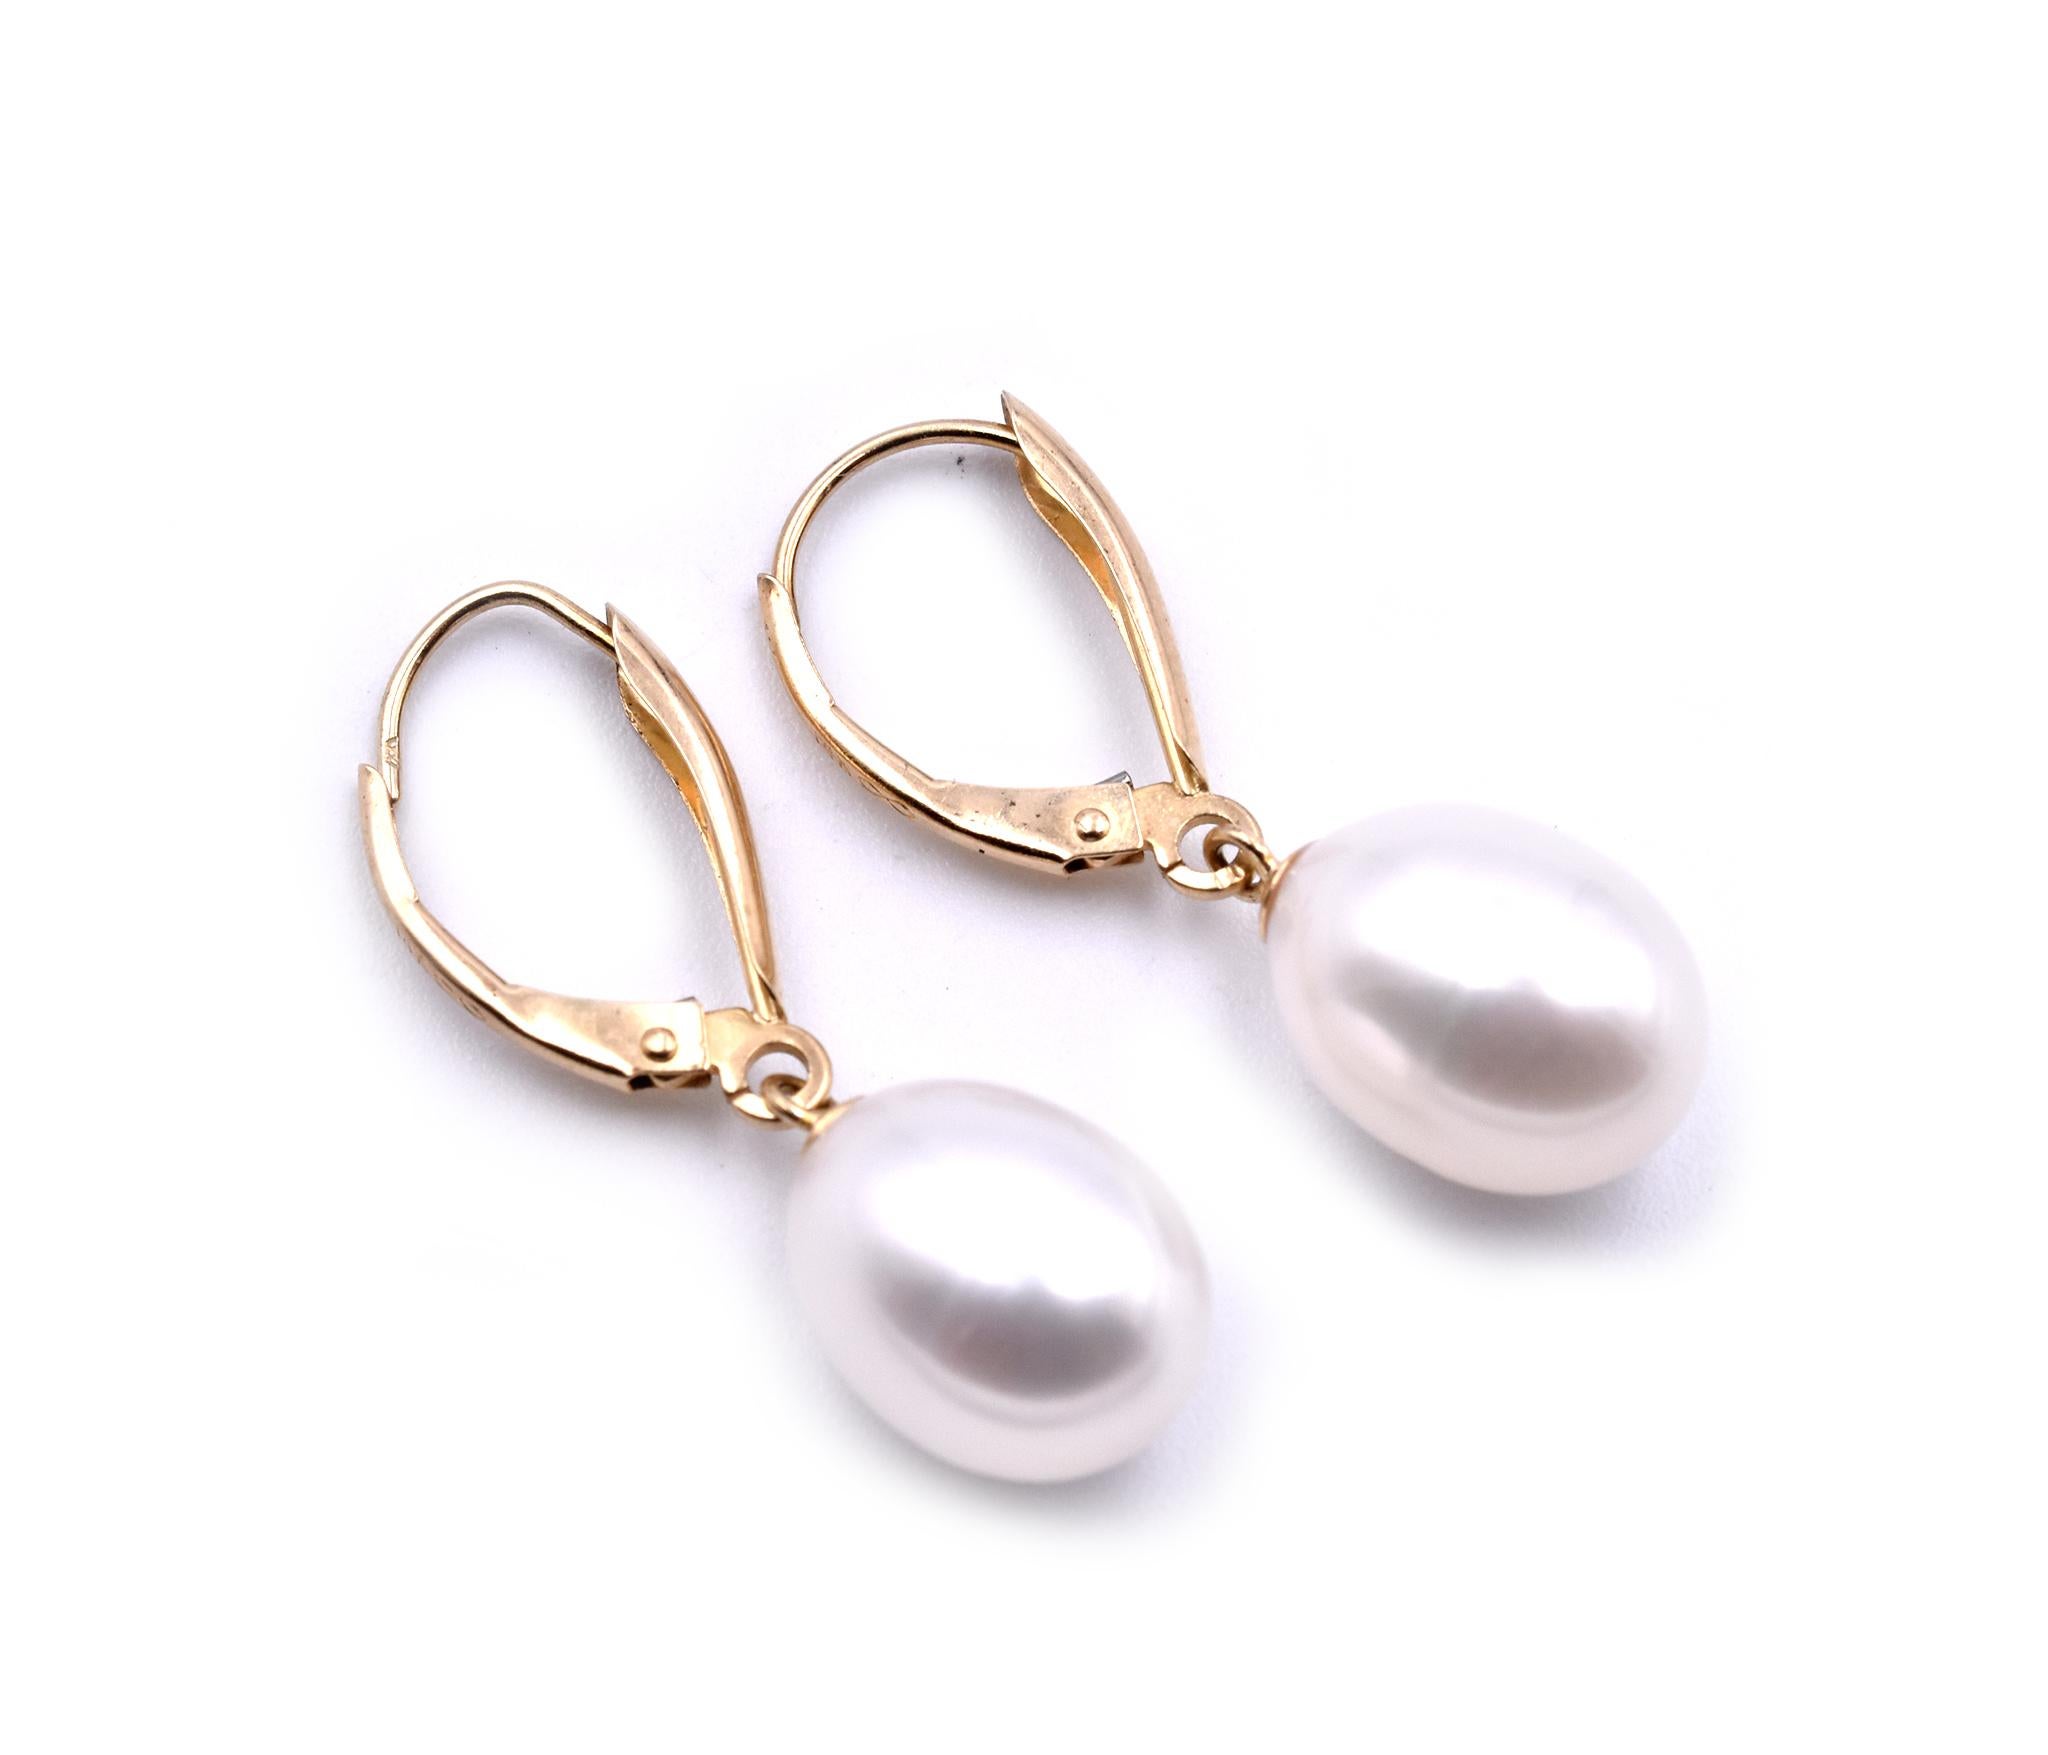 Designer: custom design
Material: 14k yellow gold
Akoya Pearls: 2 pearls approximate height is 12mm
Fastenings: French lever backs
Dimensions: earring measure approximately 30mm tall
Weight: 3.46 grams
